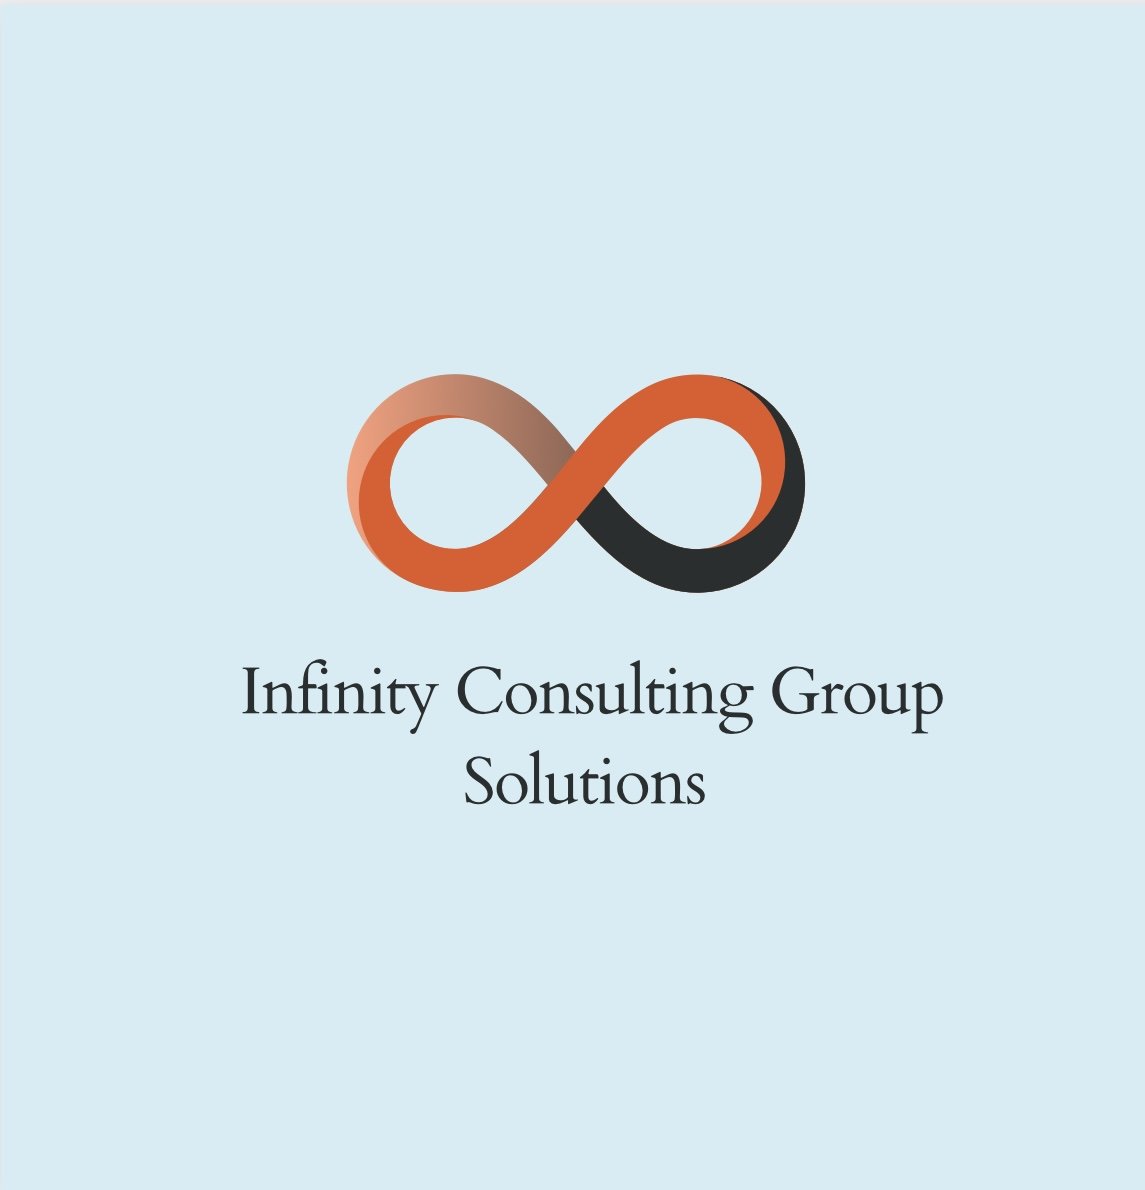 Infinity Consulting Group Solutions